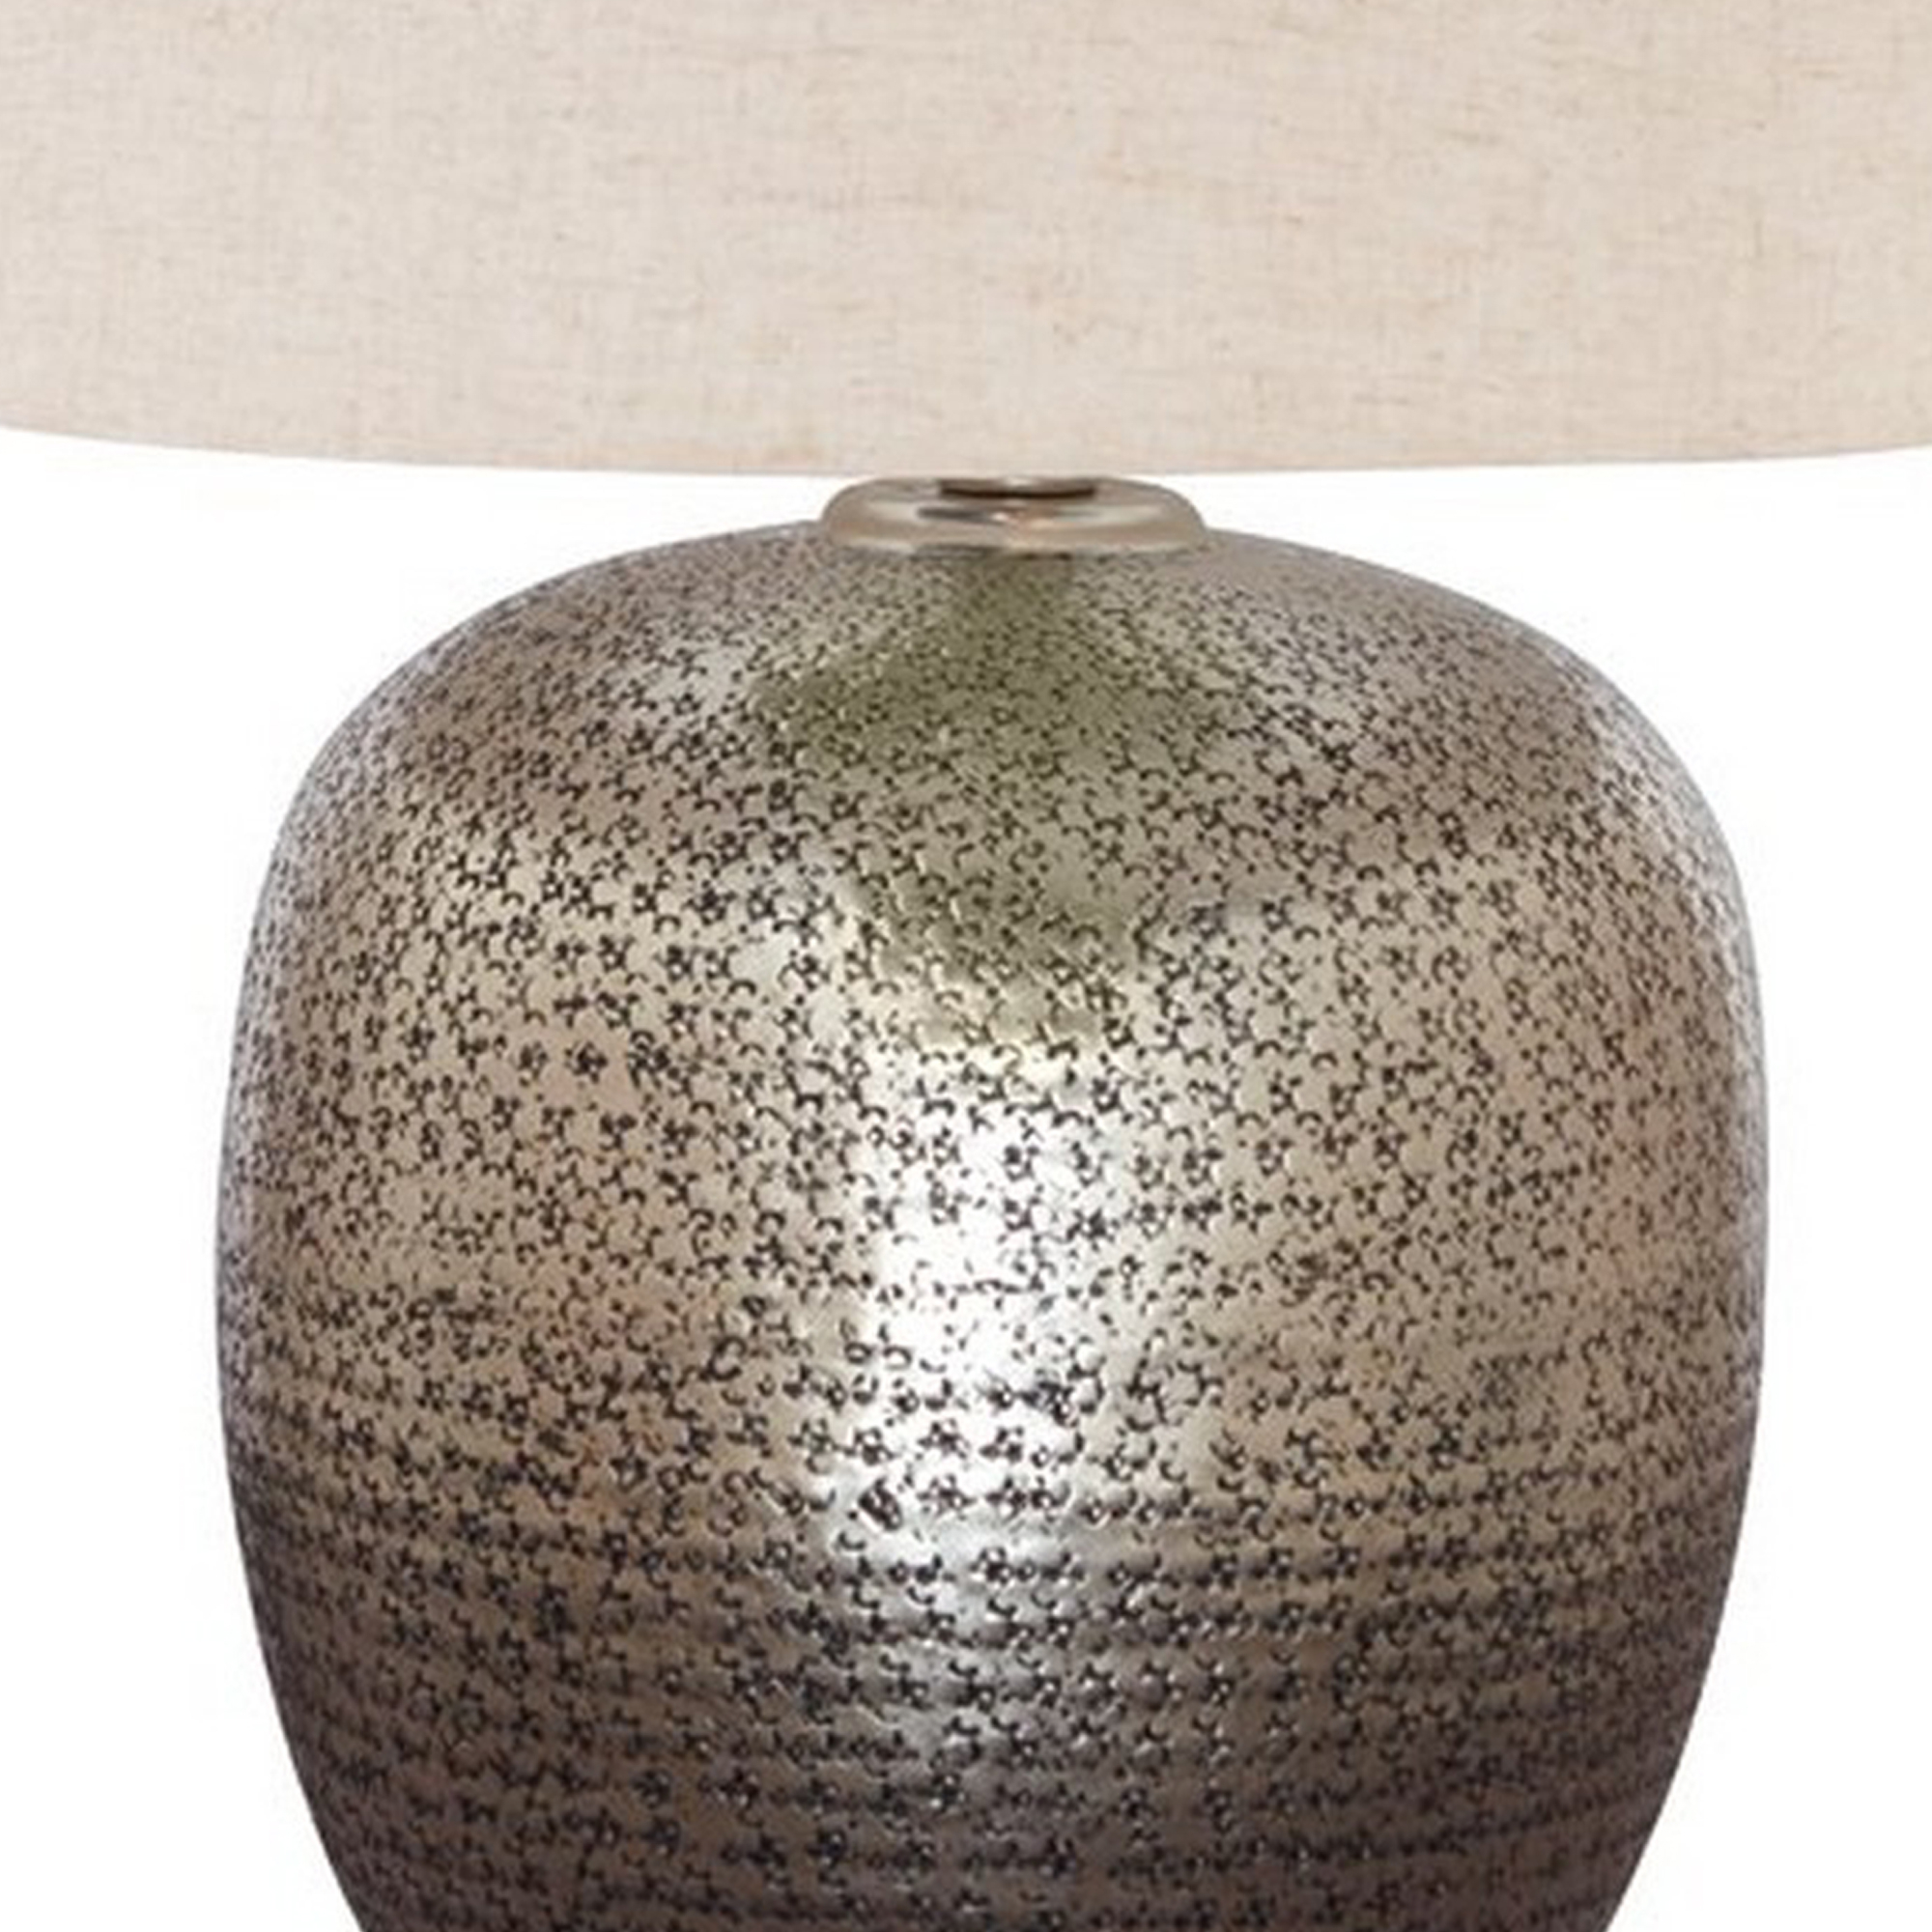 Bellied Metal Body Table Lamp With Splotched Details, Brass And Cream- Saltoro Sherpi